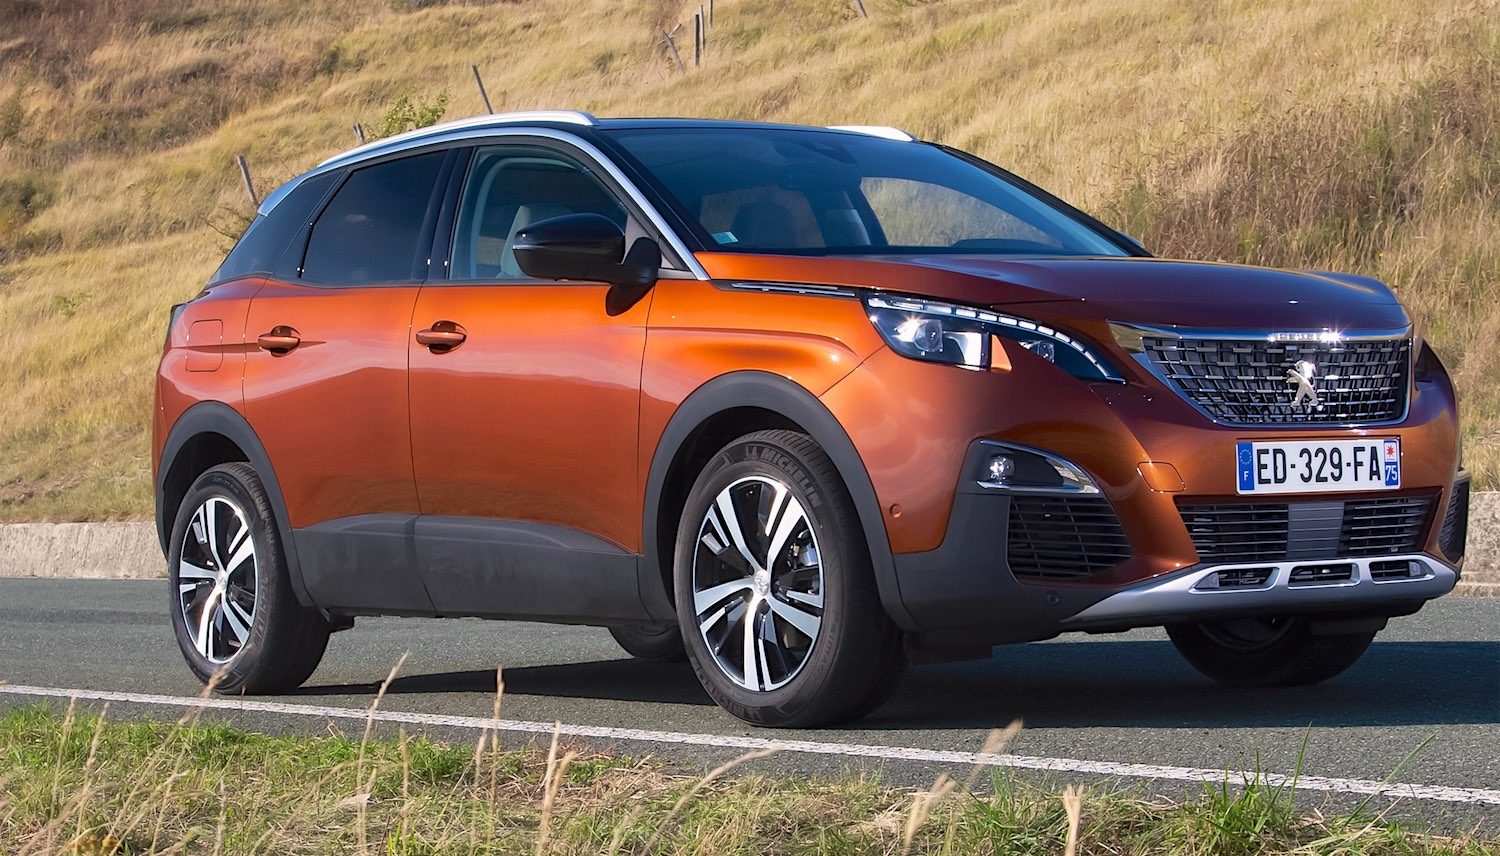 Review of the All New Peugeot 3008 by Tim Barnes-Clay for Drive.co.uk